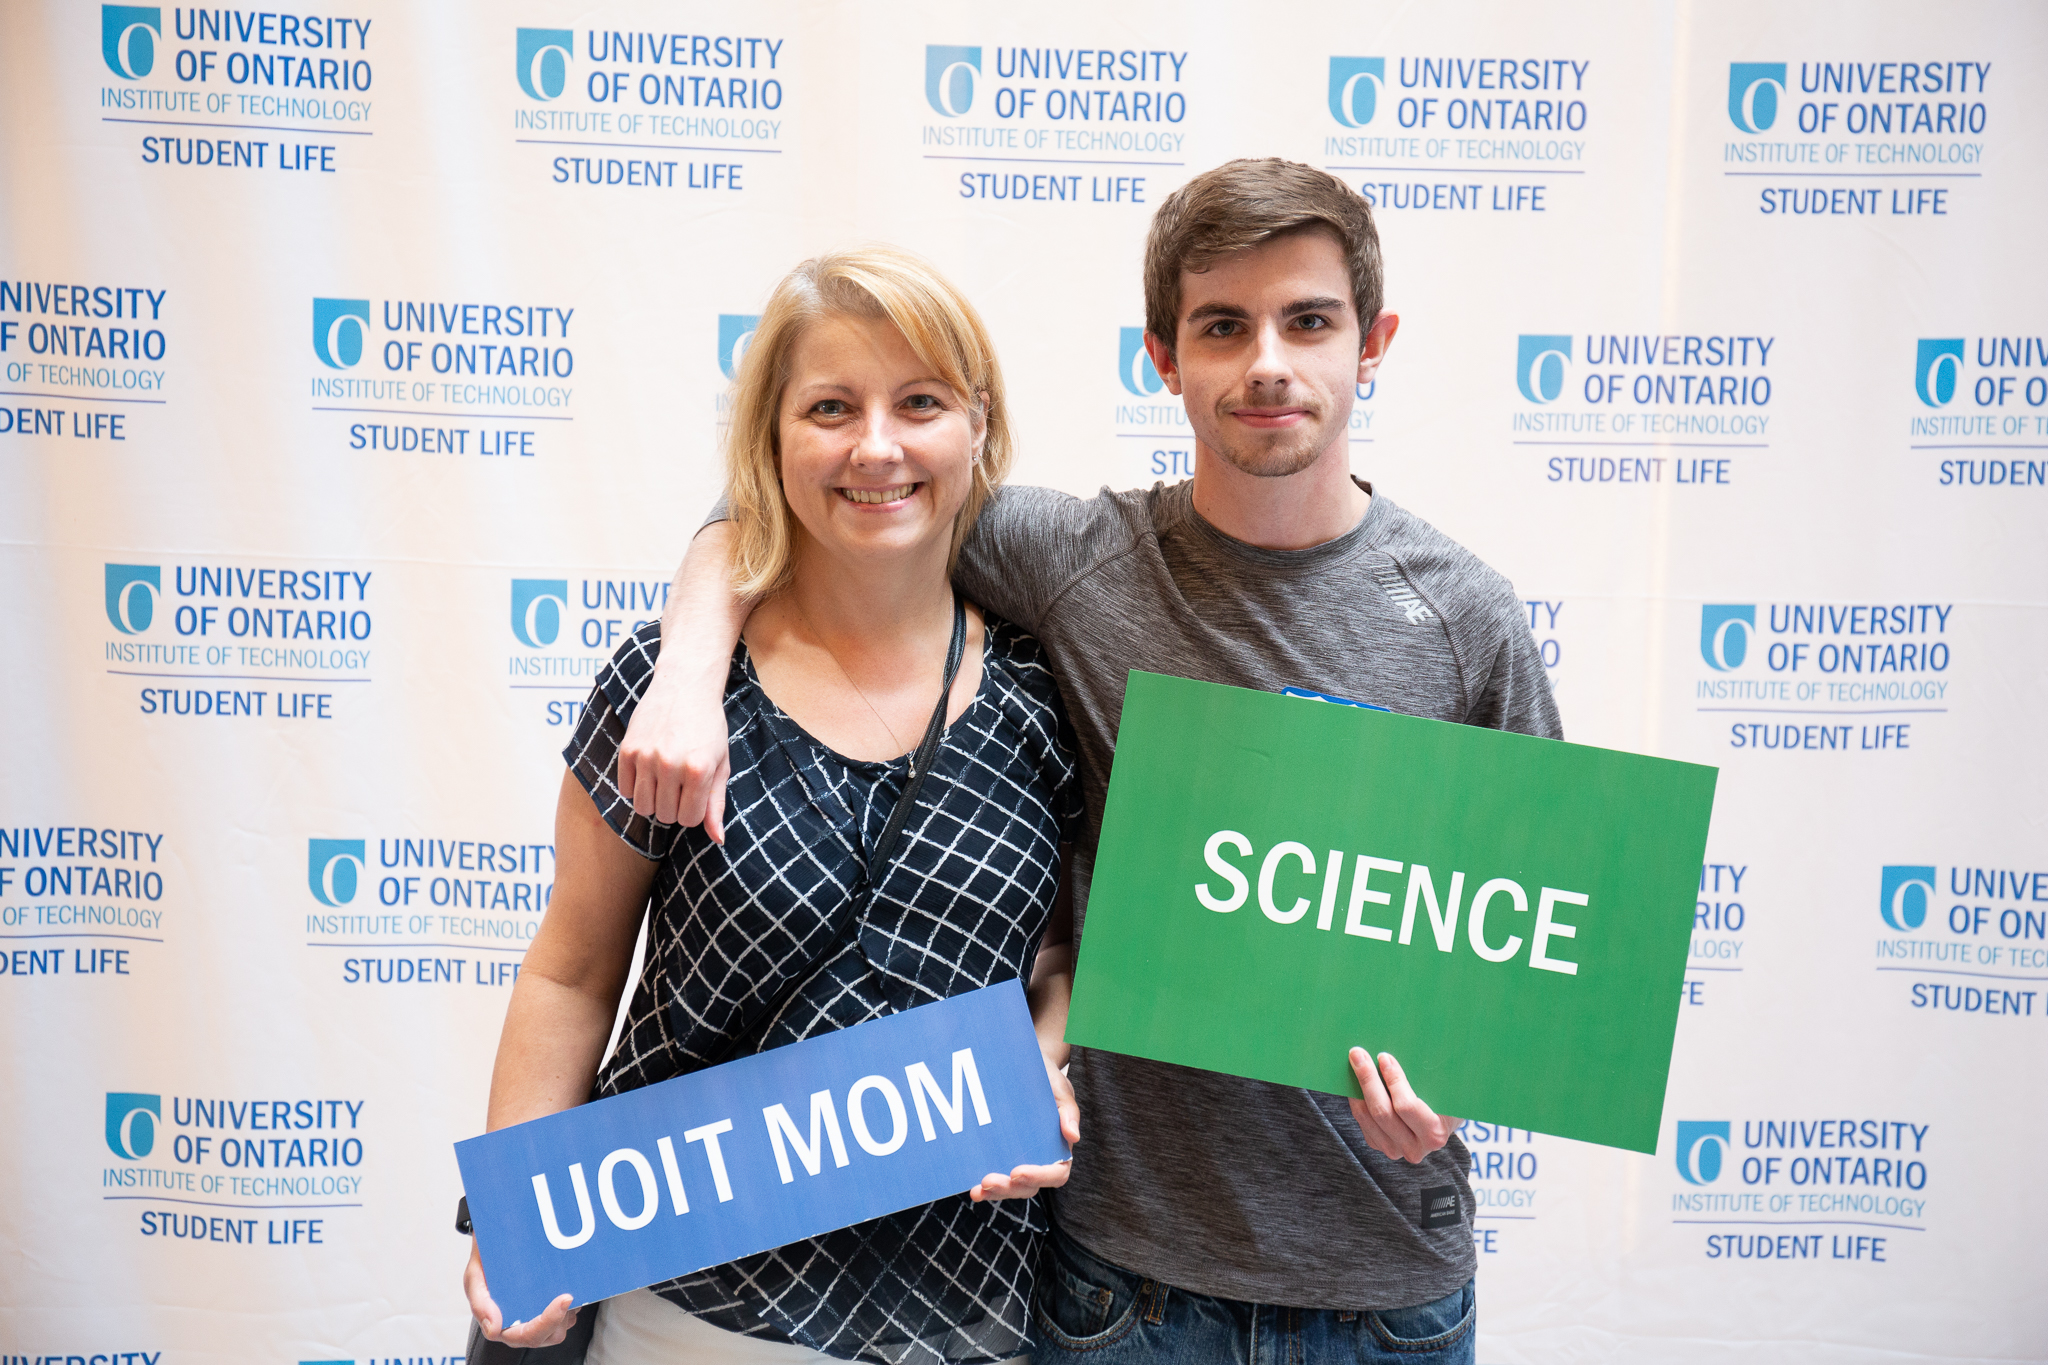 Student and mother holding science and uoit mom signs